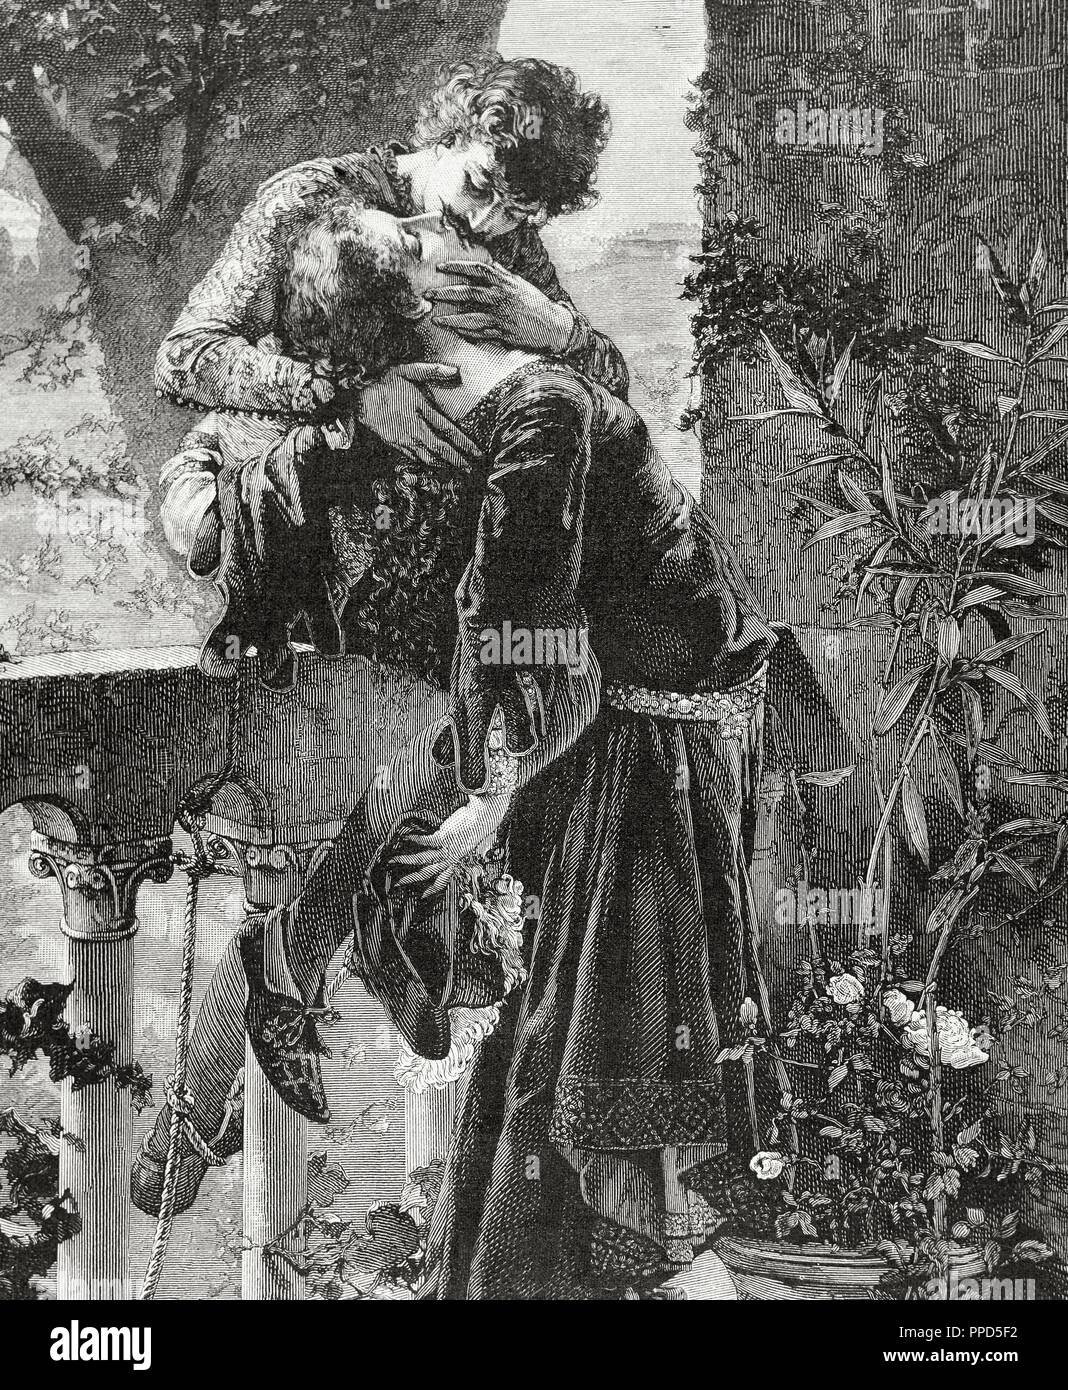 William Shakespeare (1564-1616). English writer. Romeo and Juliet kissing. Engraving, by Falander, 1887. Stock Photo